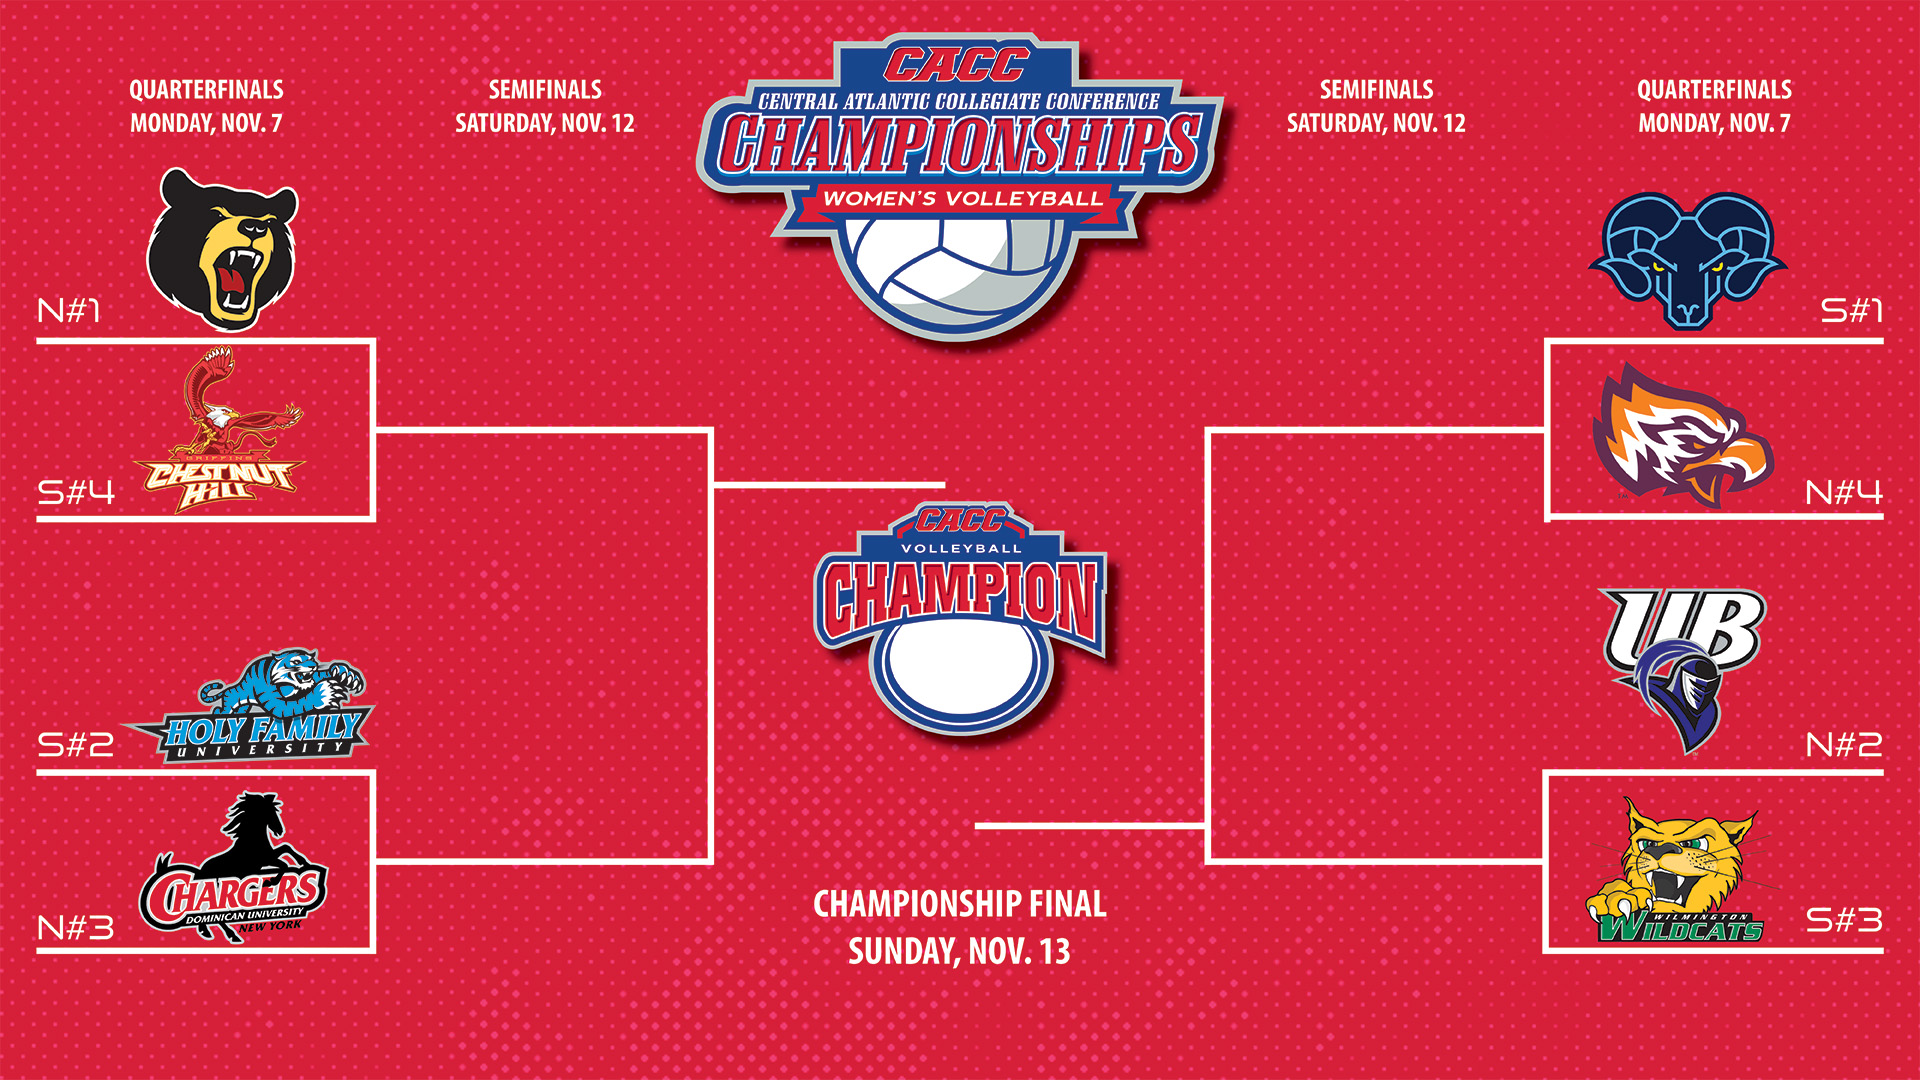 2022 CACC WOMEN'S VOLLEYBALL CHAMPIONSHIP CENTRAL